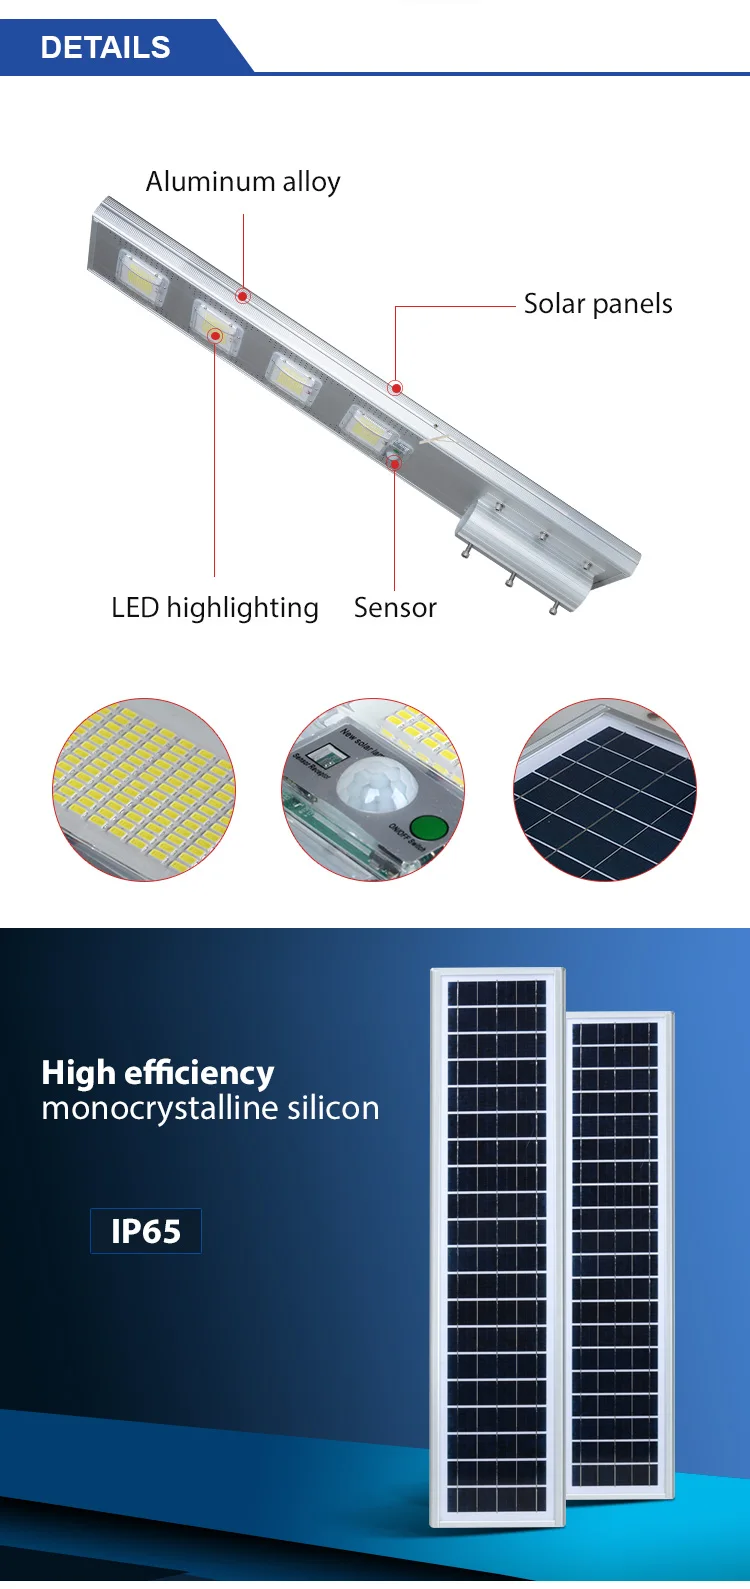 ALLTOP SMD Aluminum Outdoor IP65 waterproof 60W 120W 180W 240W integrated all in one solar led street light